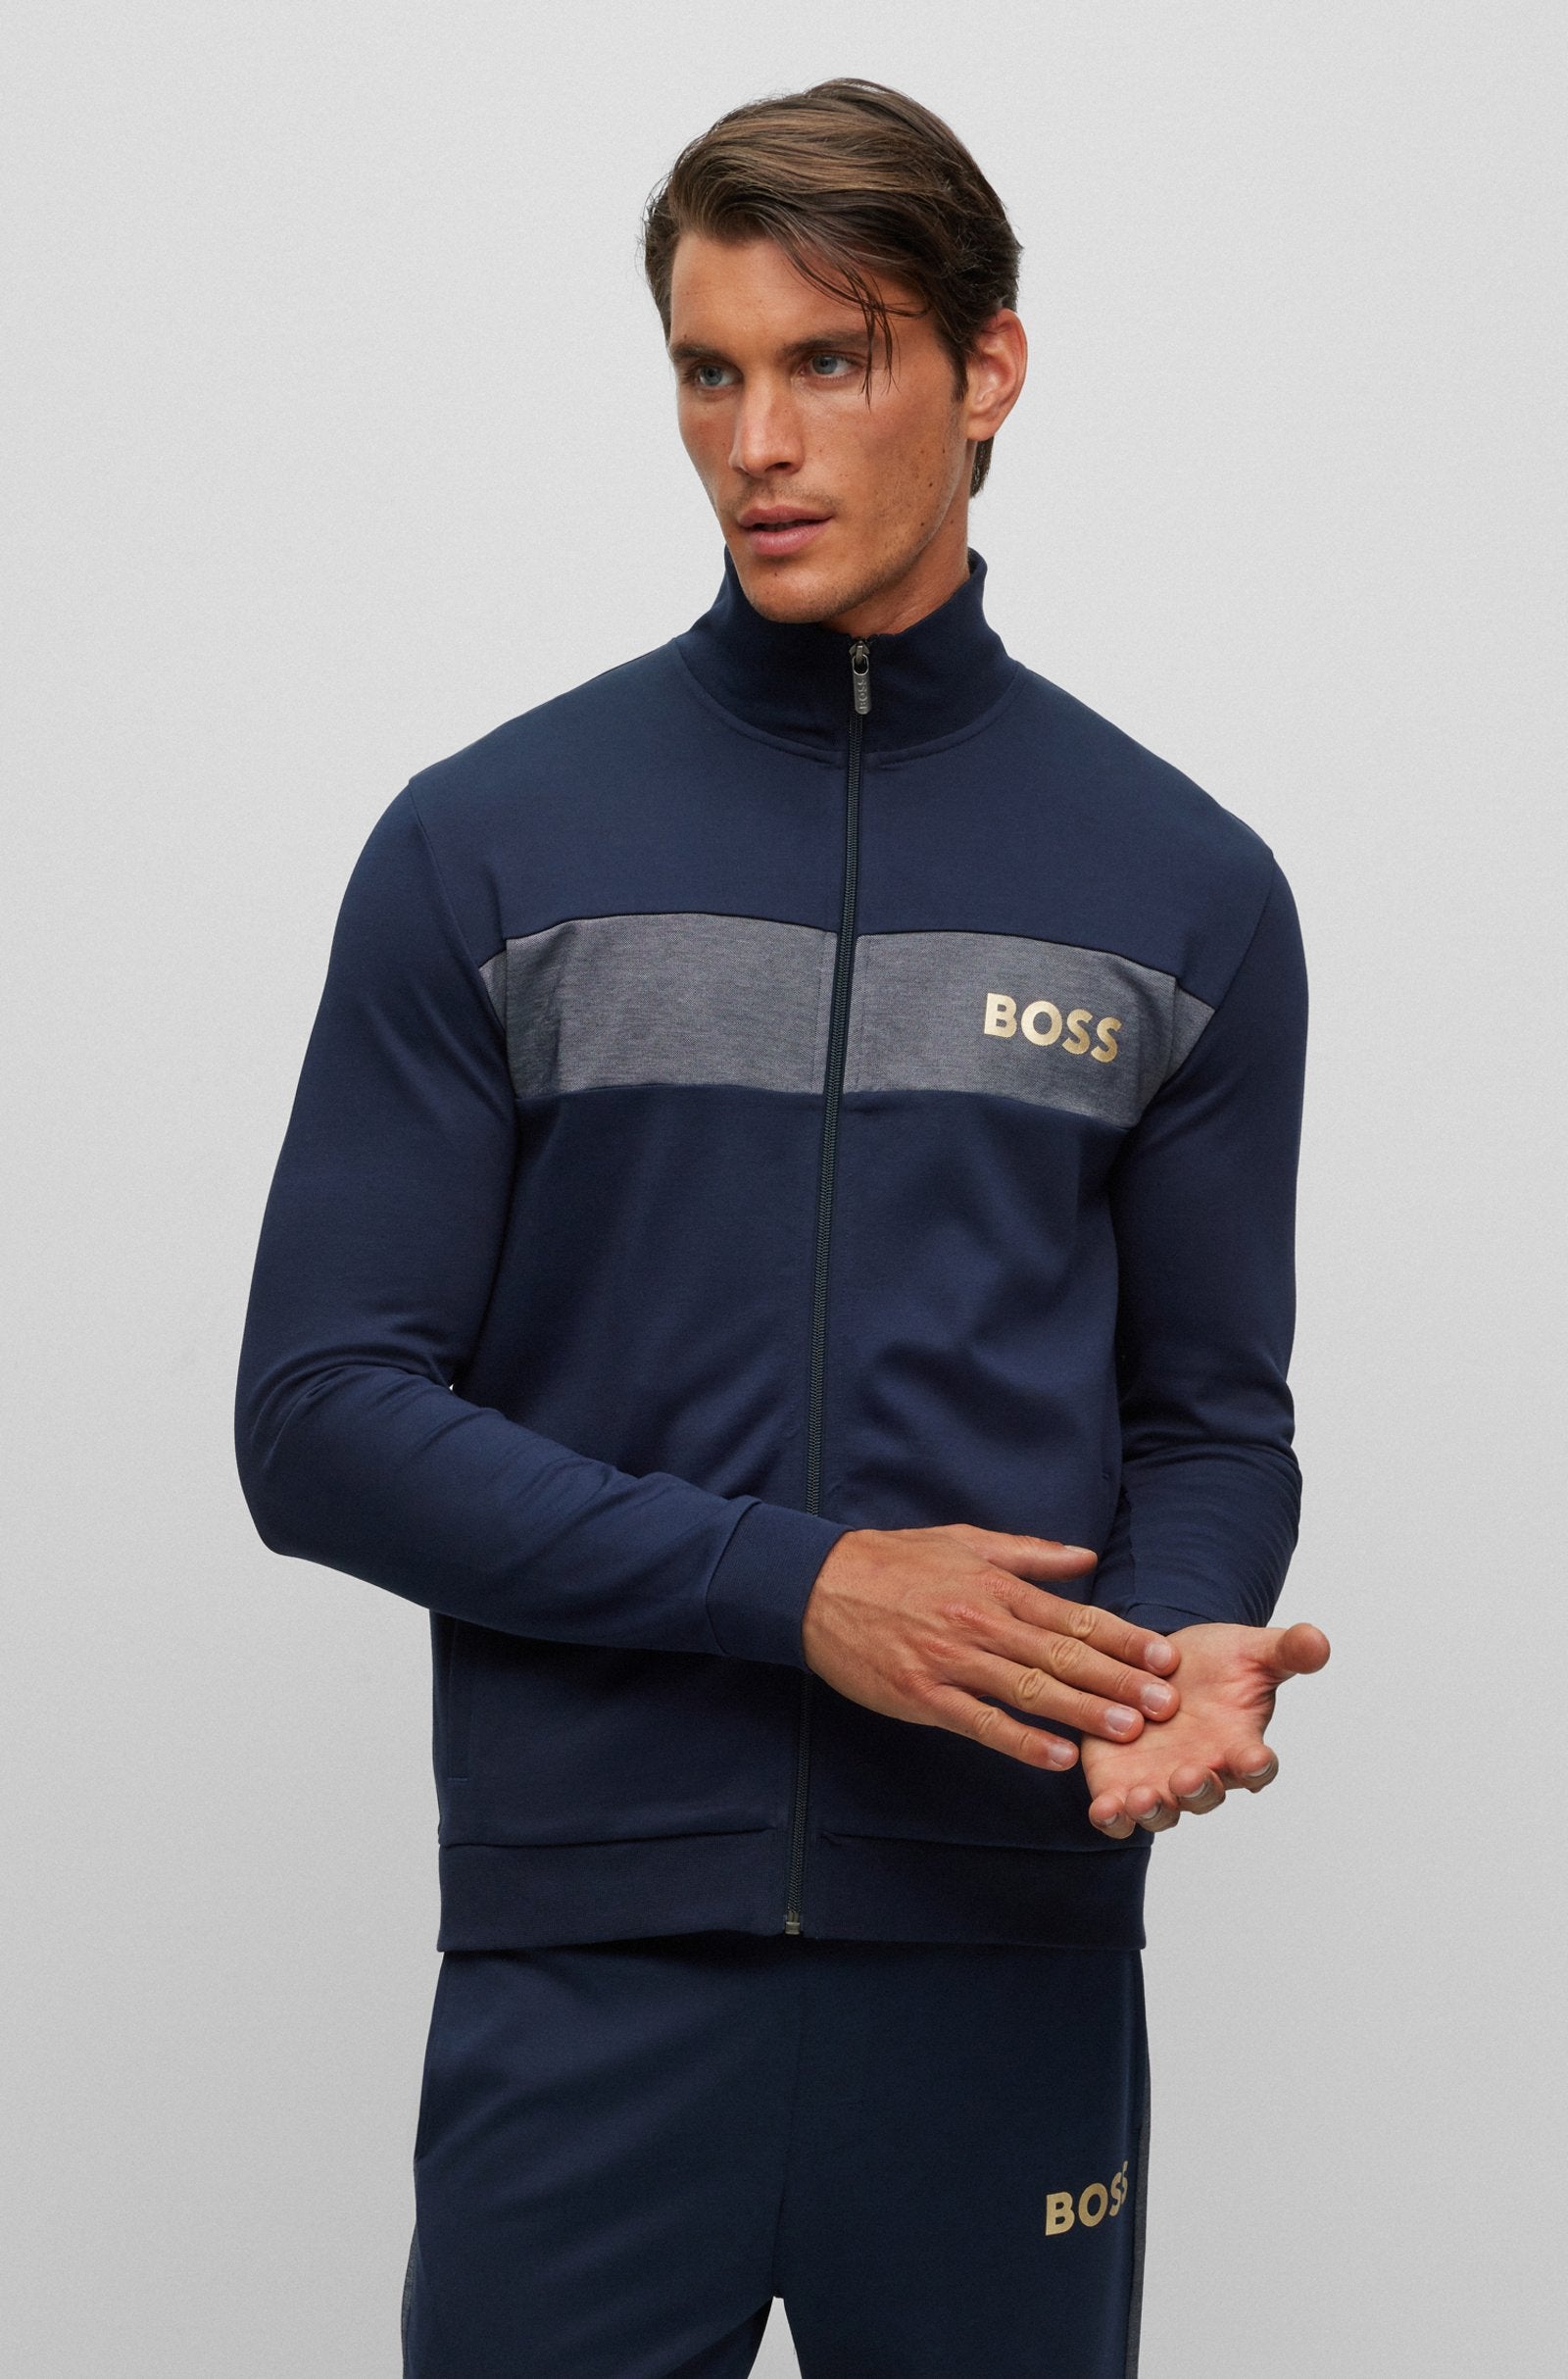 BOSS - Dark Blue COTTON ZIP-UP JACKET WITH EMBROIDERED LOGO 50503040 403